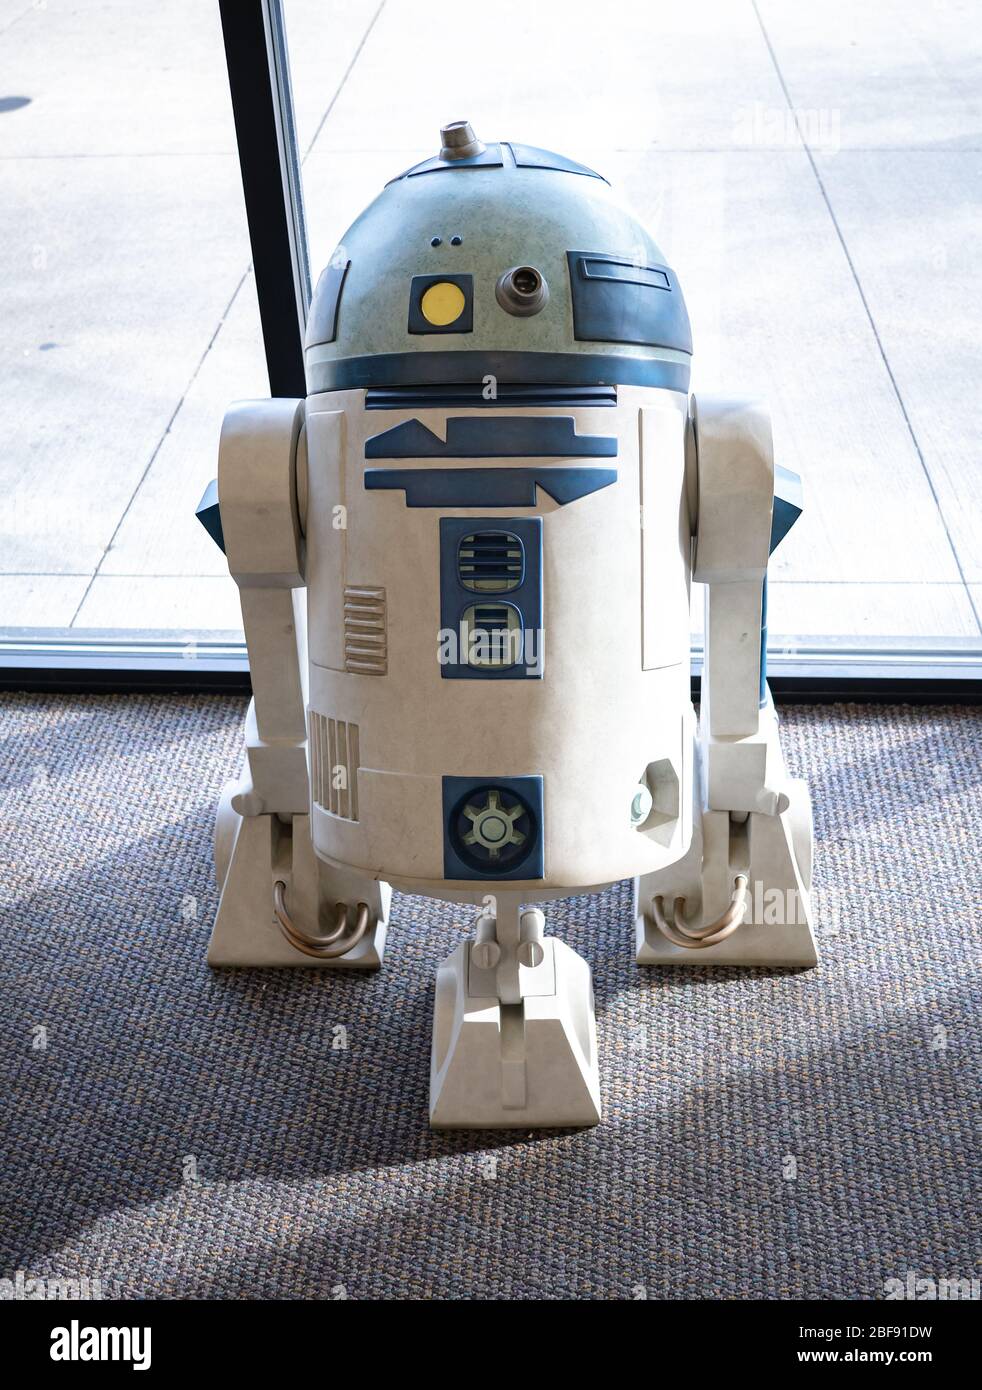 A life-size action figure of R2-D2 kept on display at a local comic book store. Stock Photo